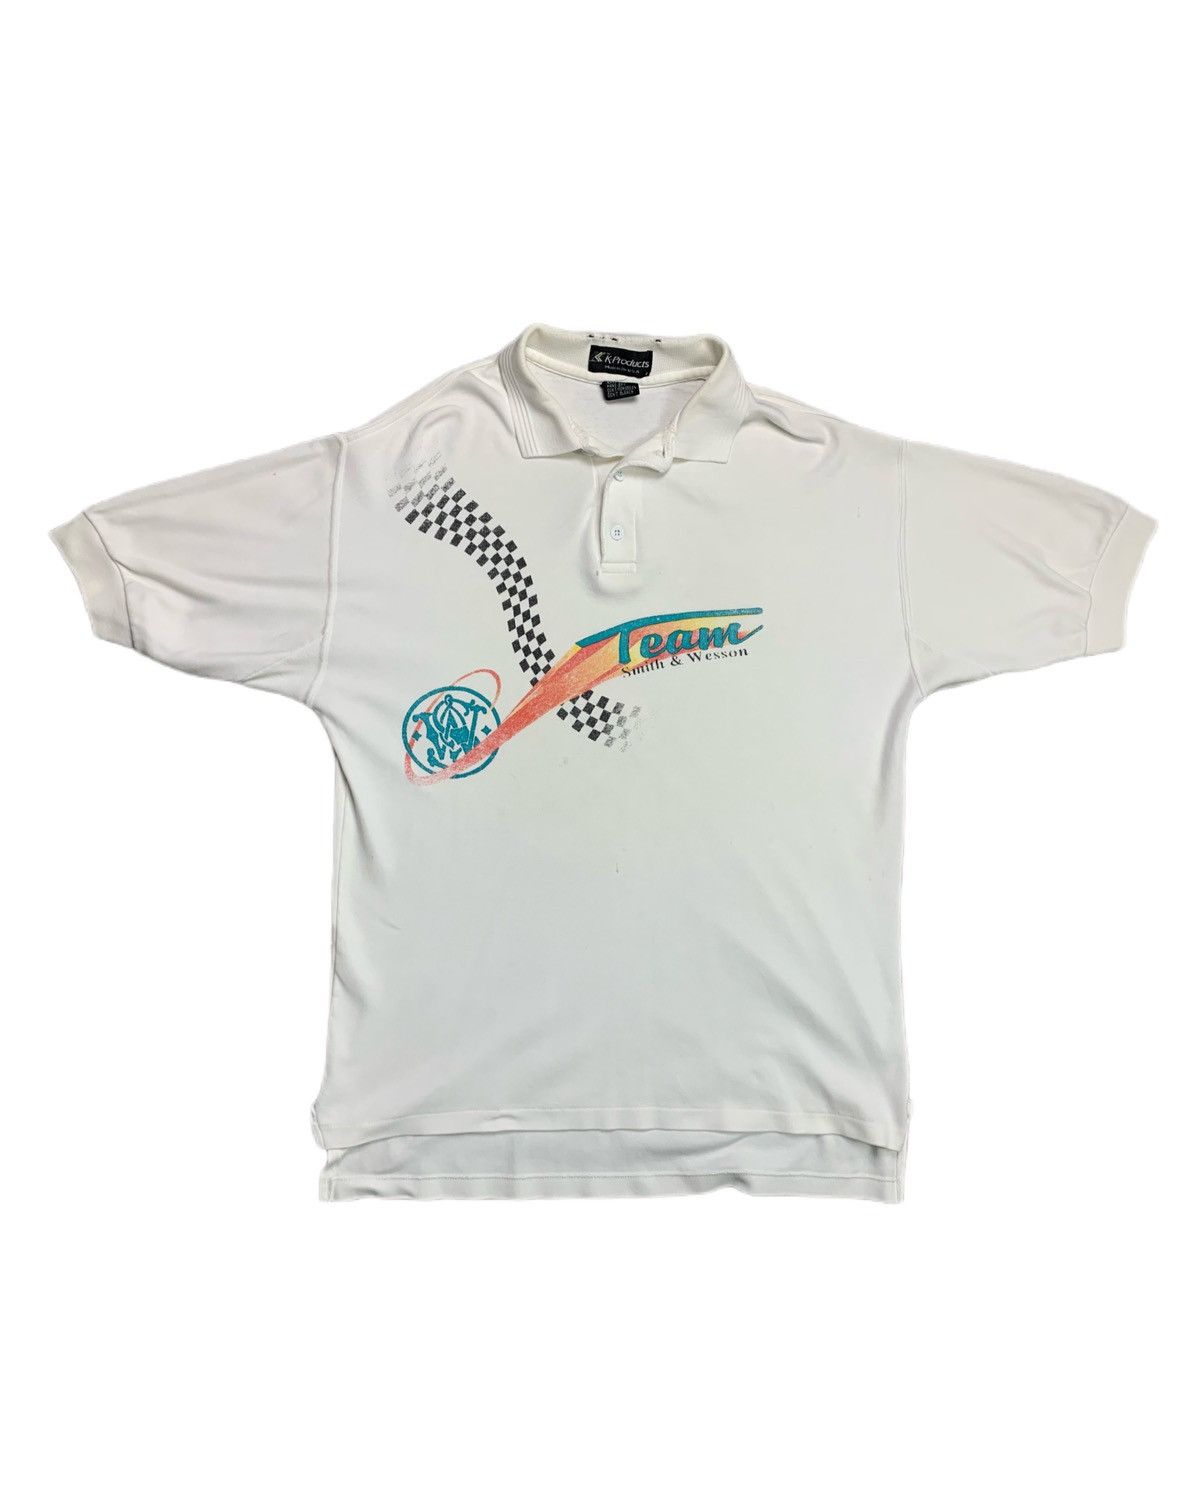 Vintage Vintage Smith and Wesson Racing Team Polo Shirt | Grailed